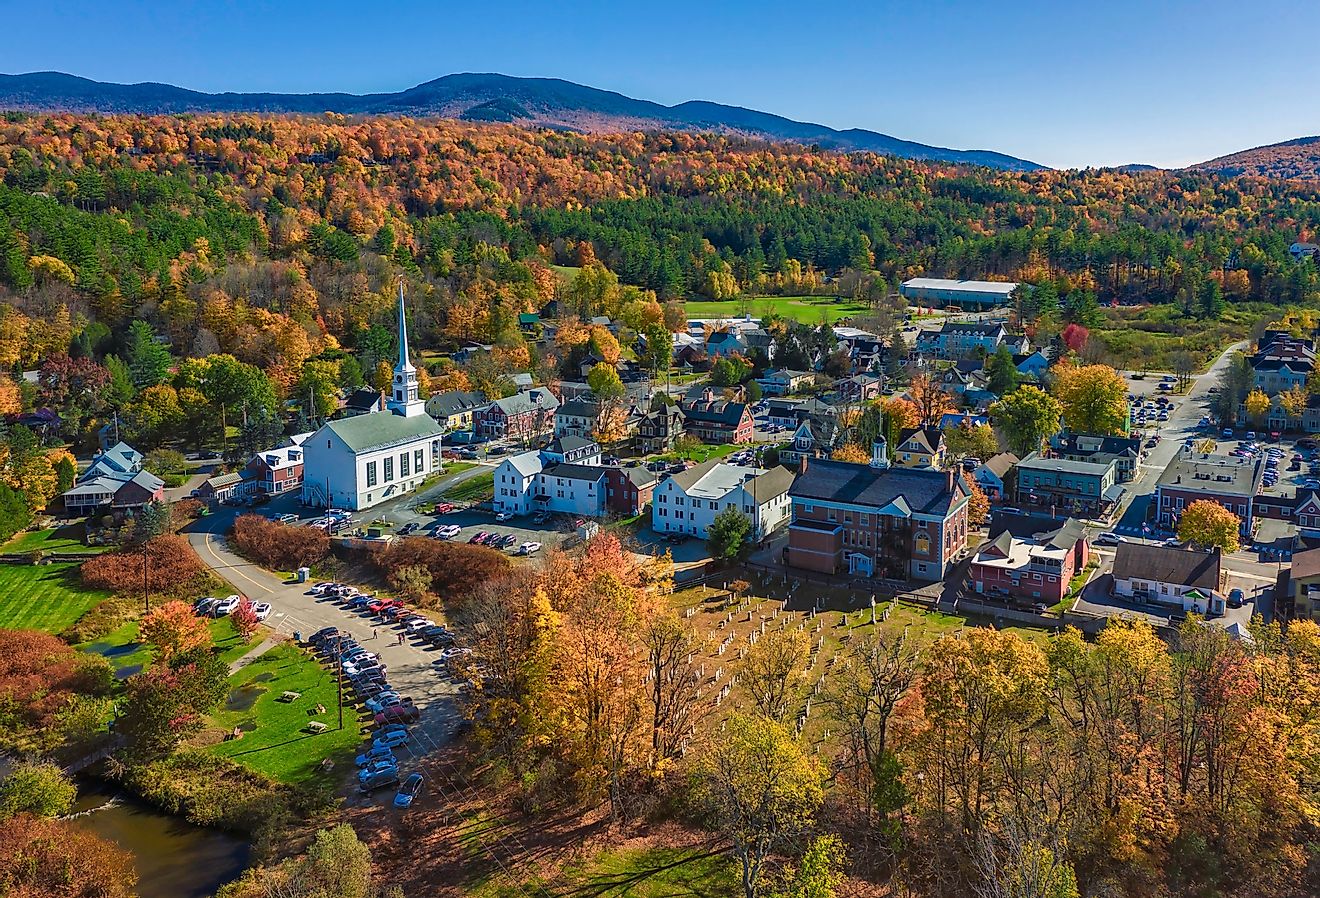 Aerial view of the charming town of Stowe, Vermont.